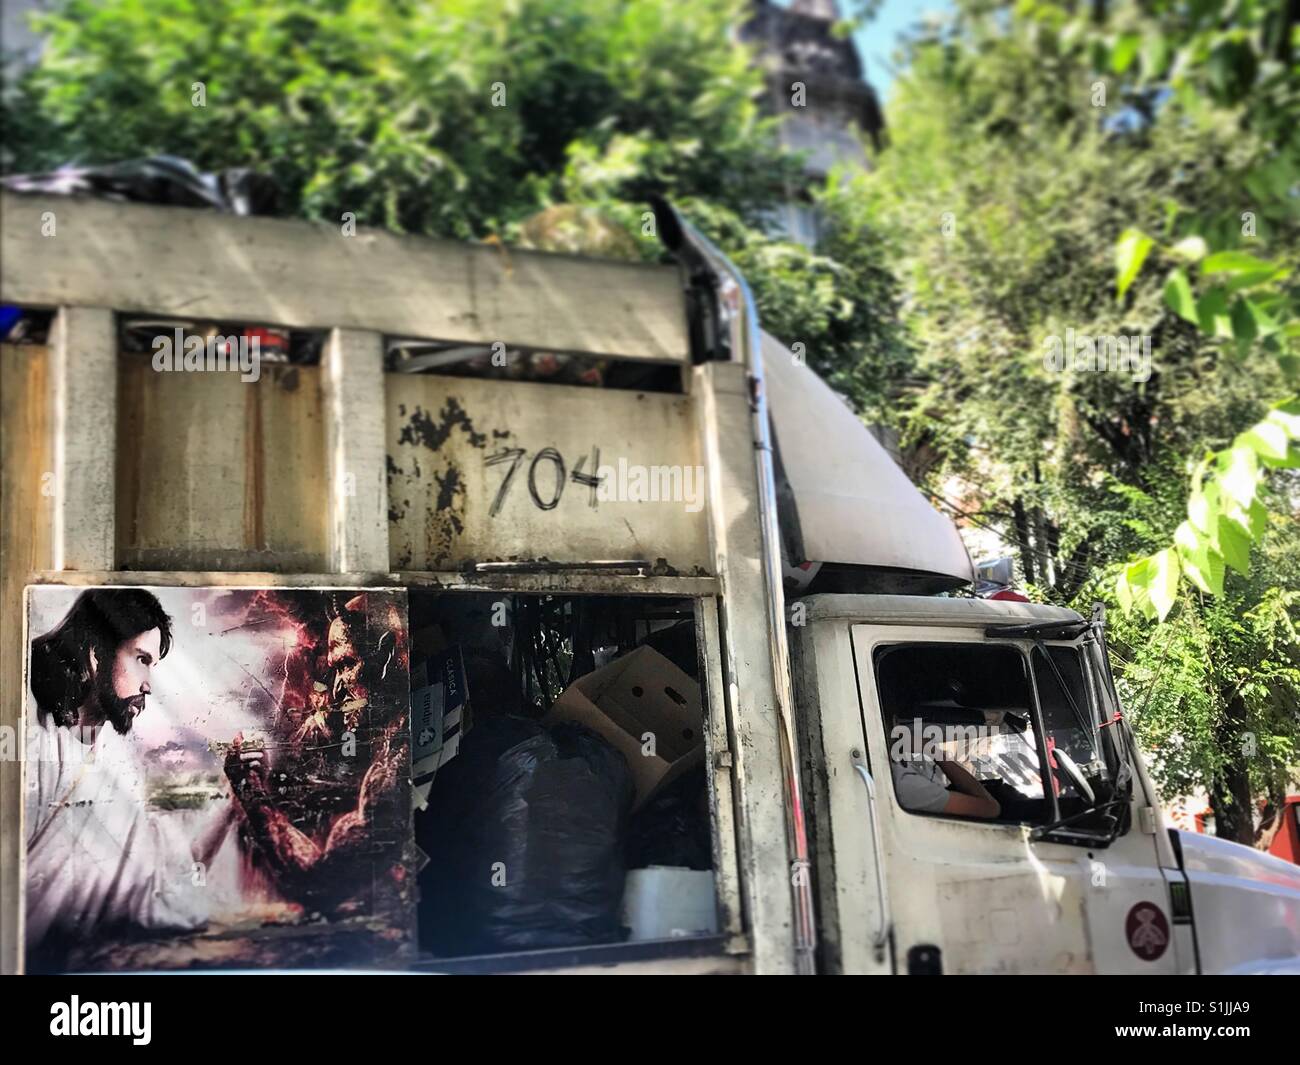 An image of Jesus arm wresting decorates a truck in Mexico City, Mexico Stock Photo